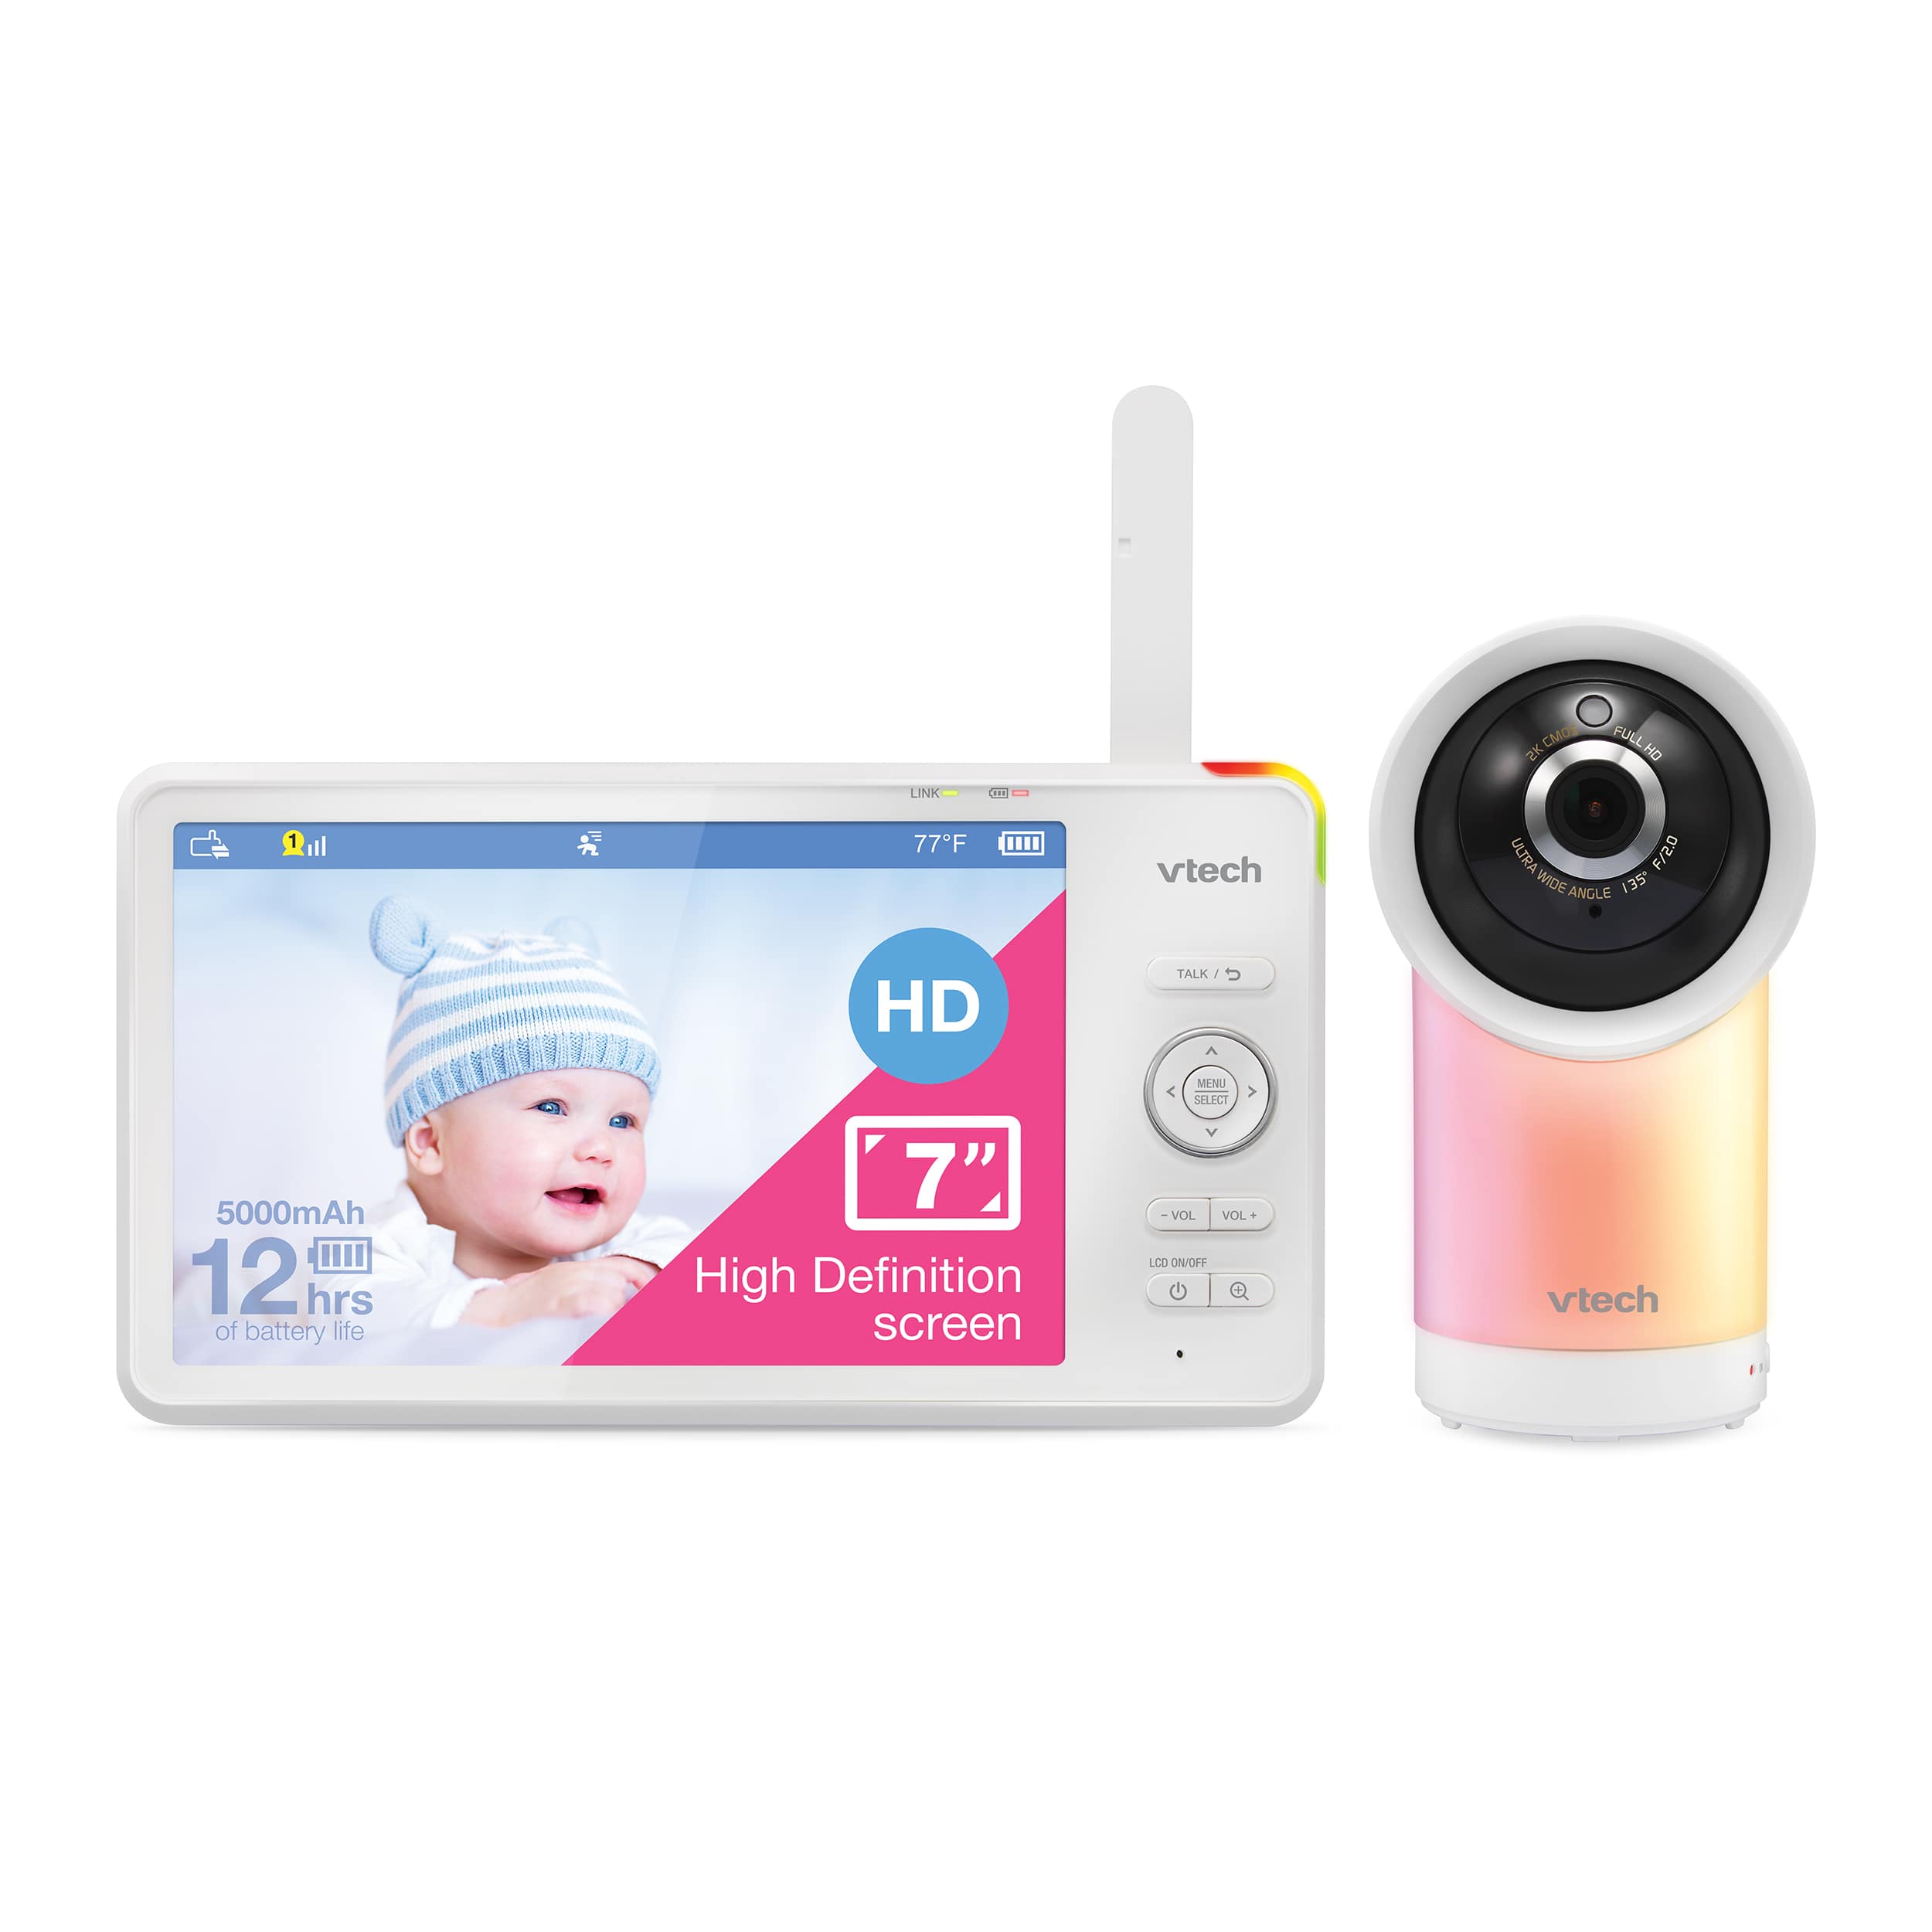 1080p Smart WiFi Remote Access 360 Degree Pan & Tilt Video Baby Monitor with 7" High Definition 720p Display, Night Light - view 1